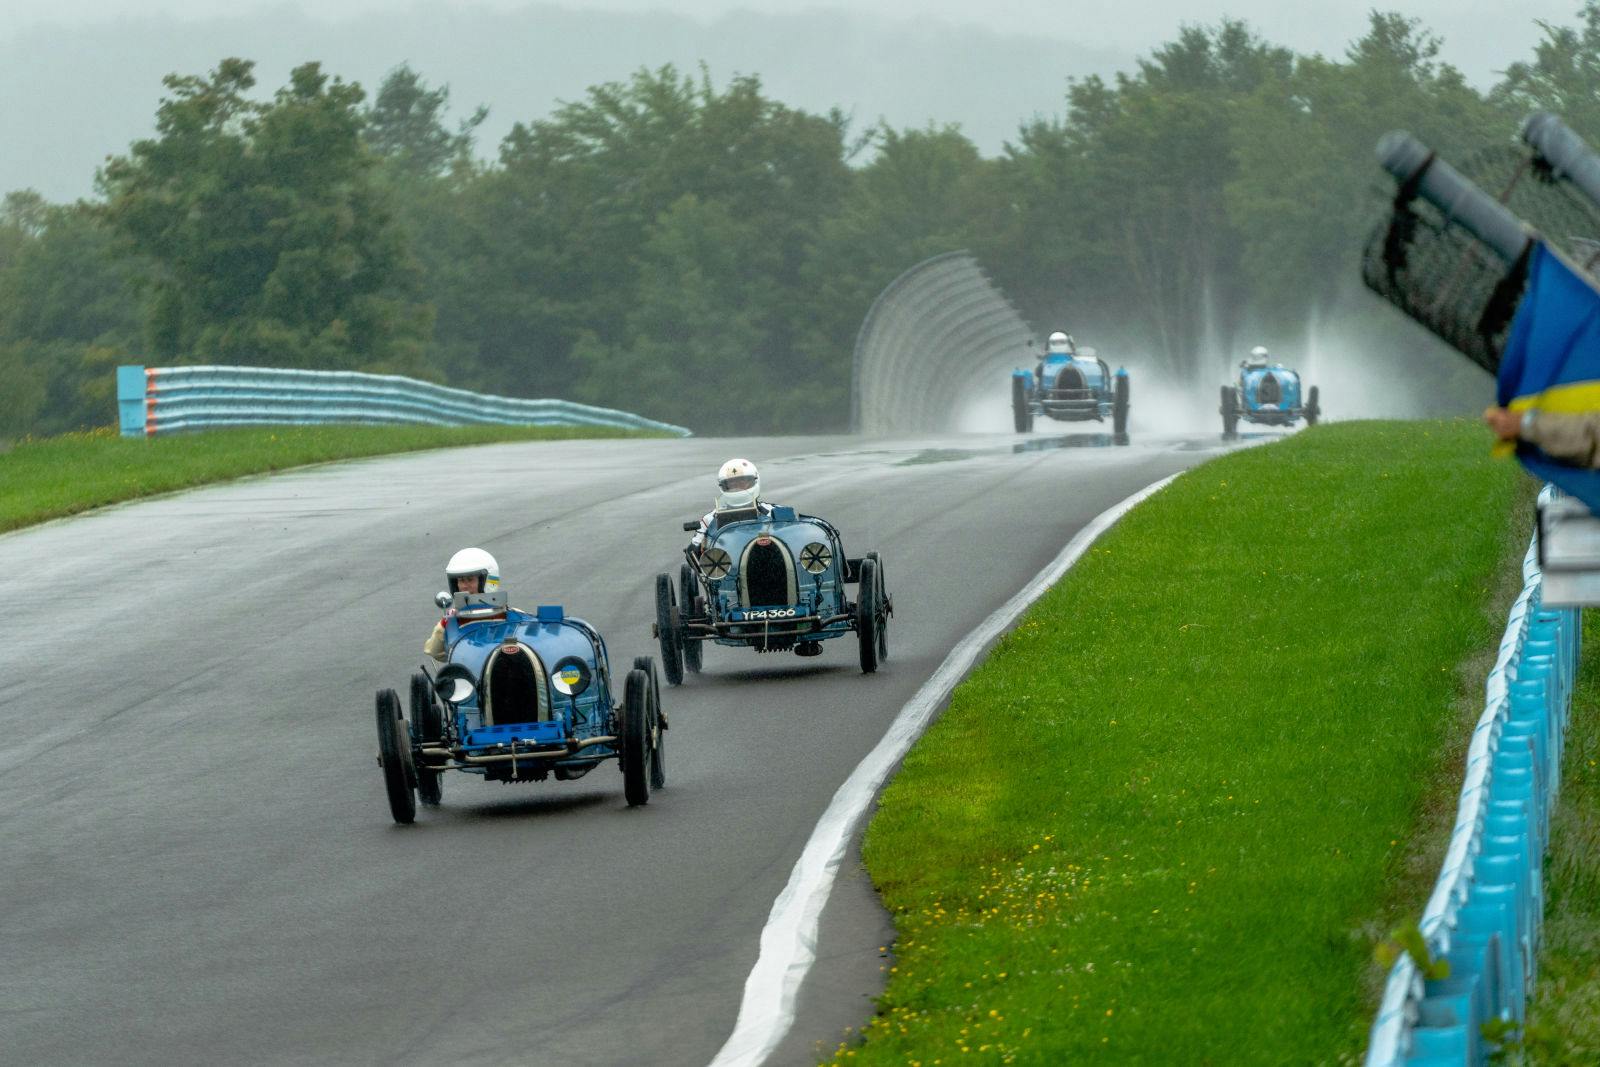 The historic Bugatti models delivered a sensational spectacle as they charged nose-to-tail around the modern Watkins Glen racing circuit.